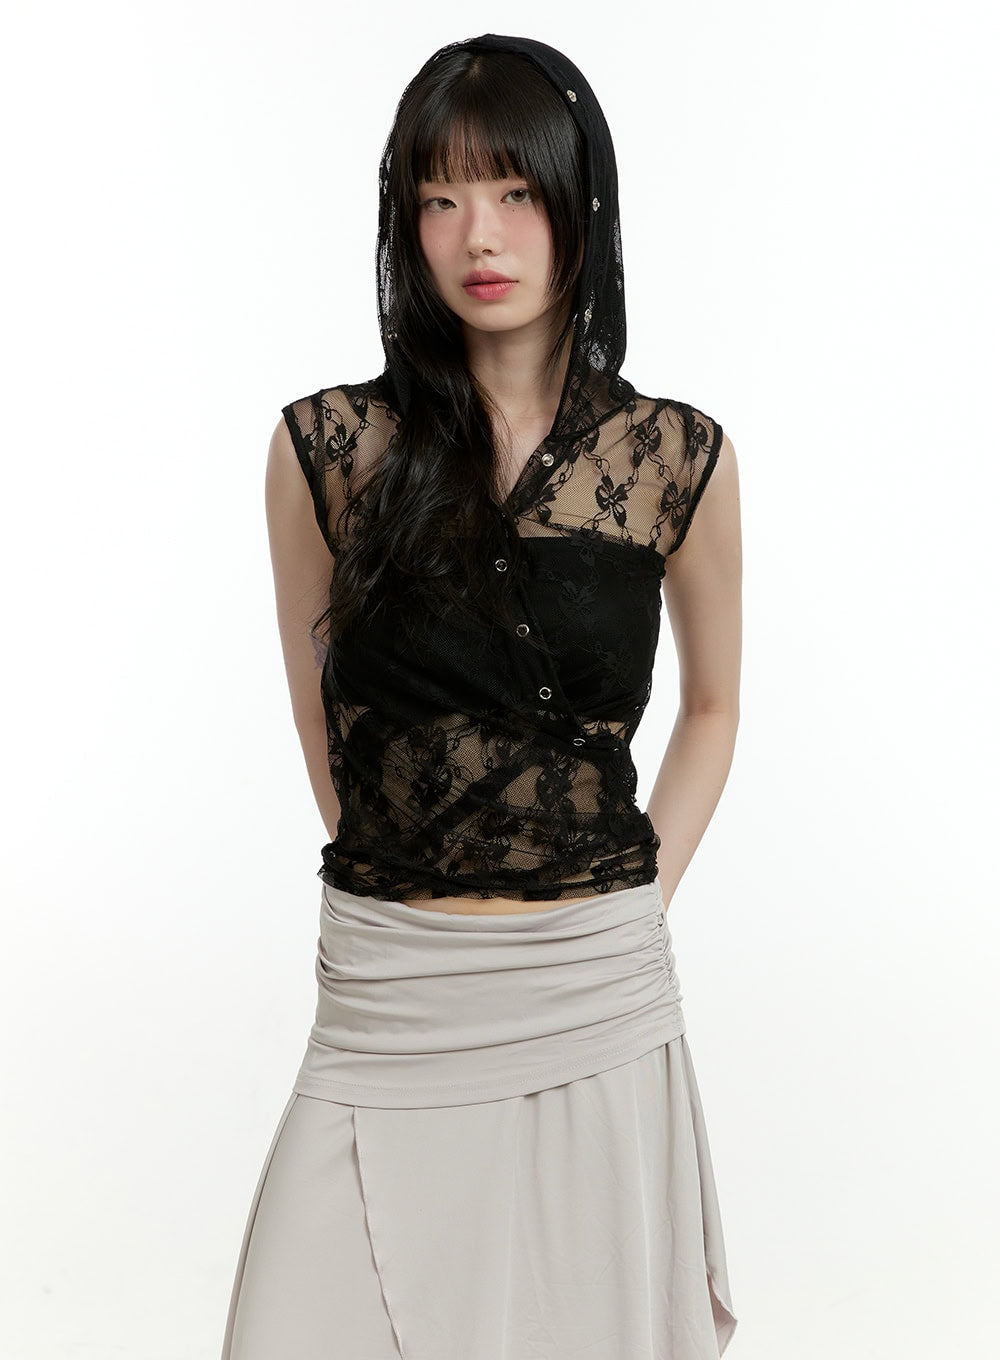 see-through-buttoned-sleeveless-hoodie-top-cl426